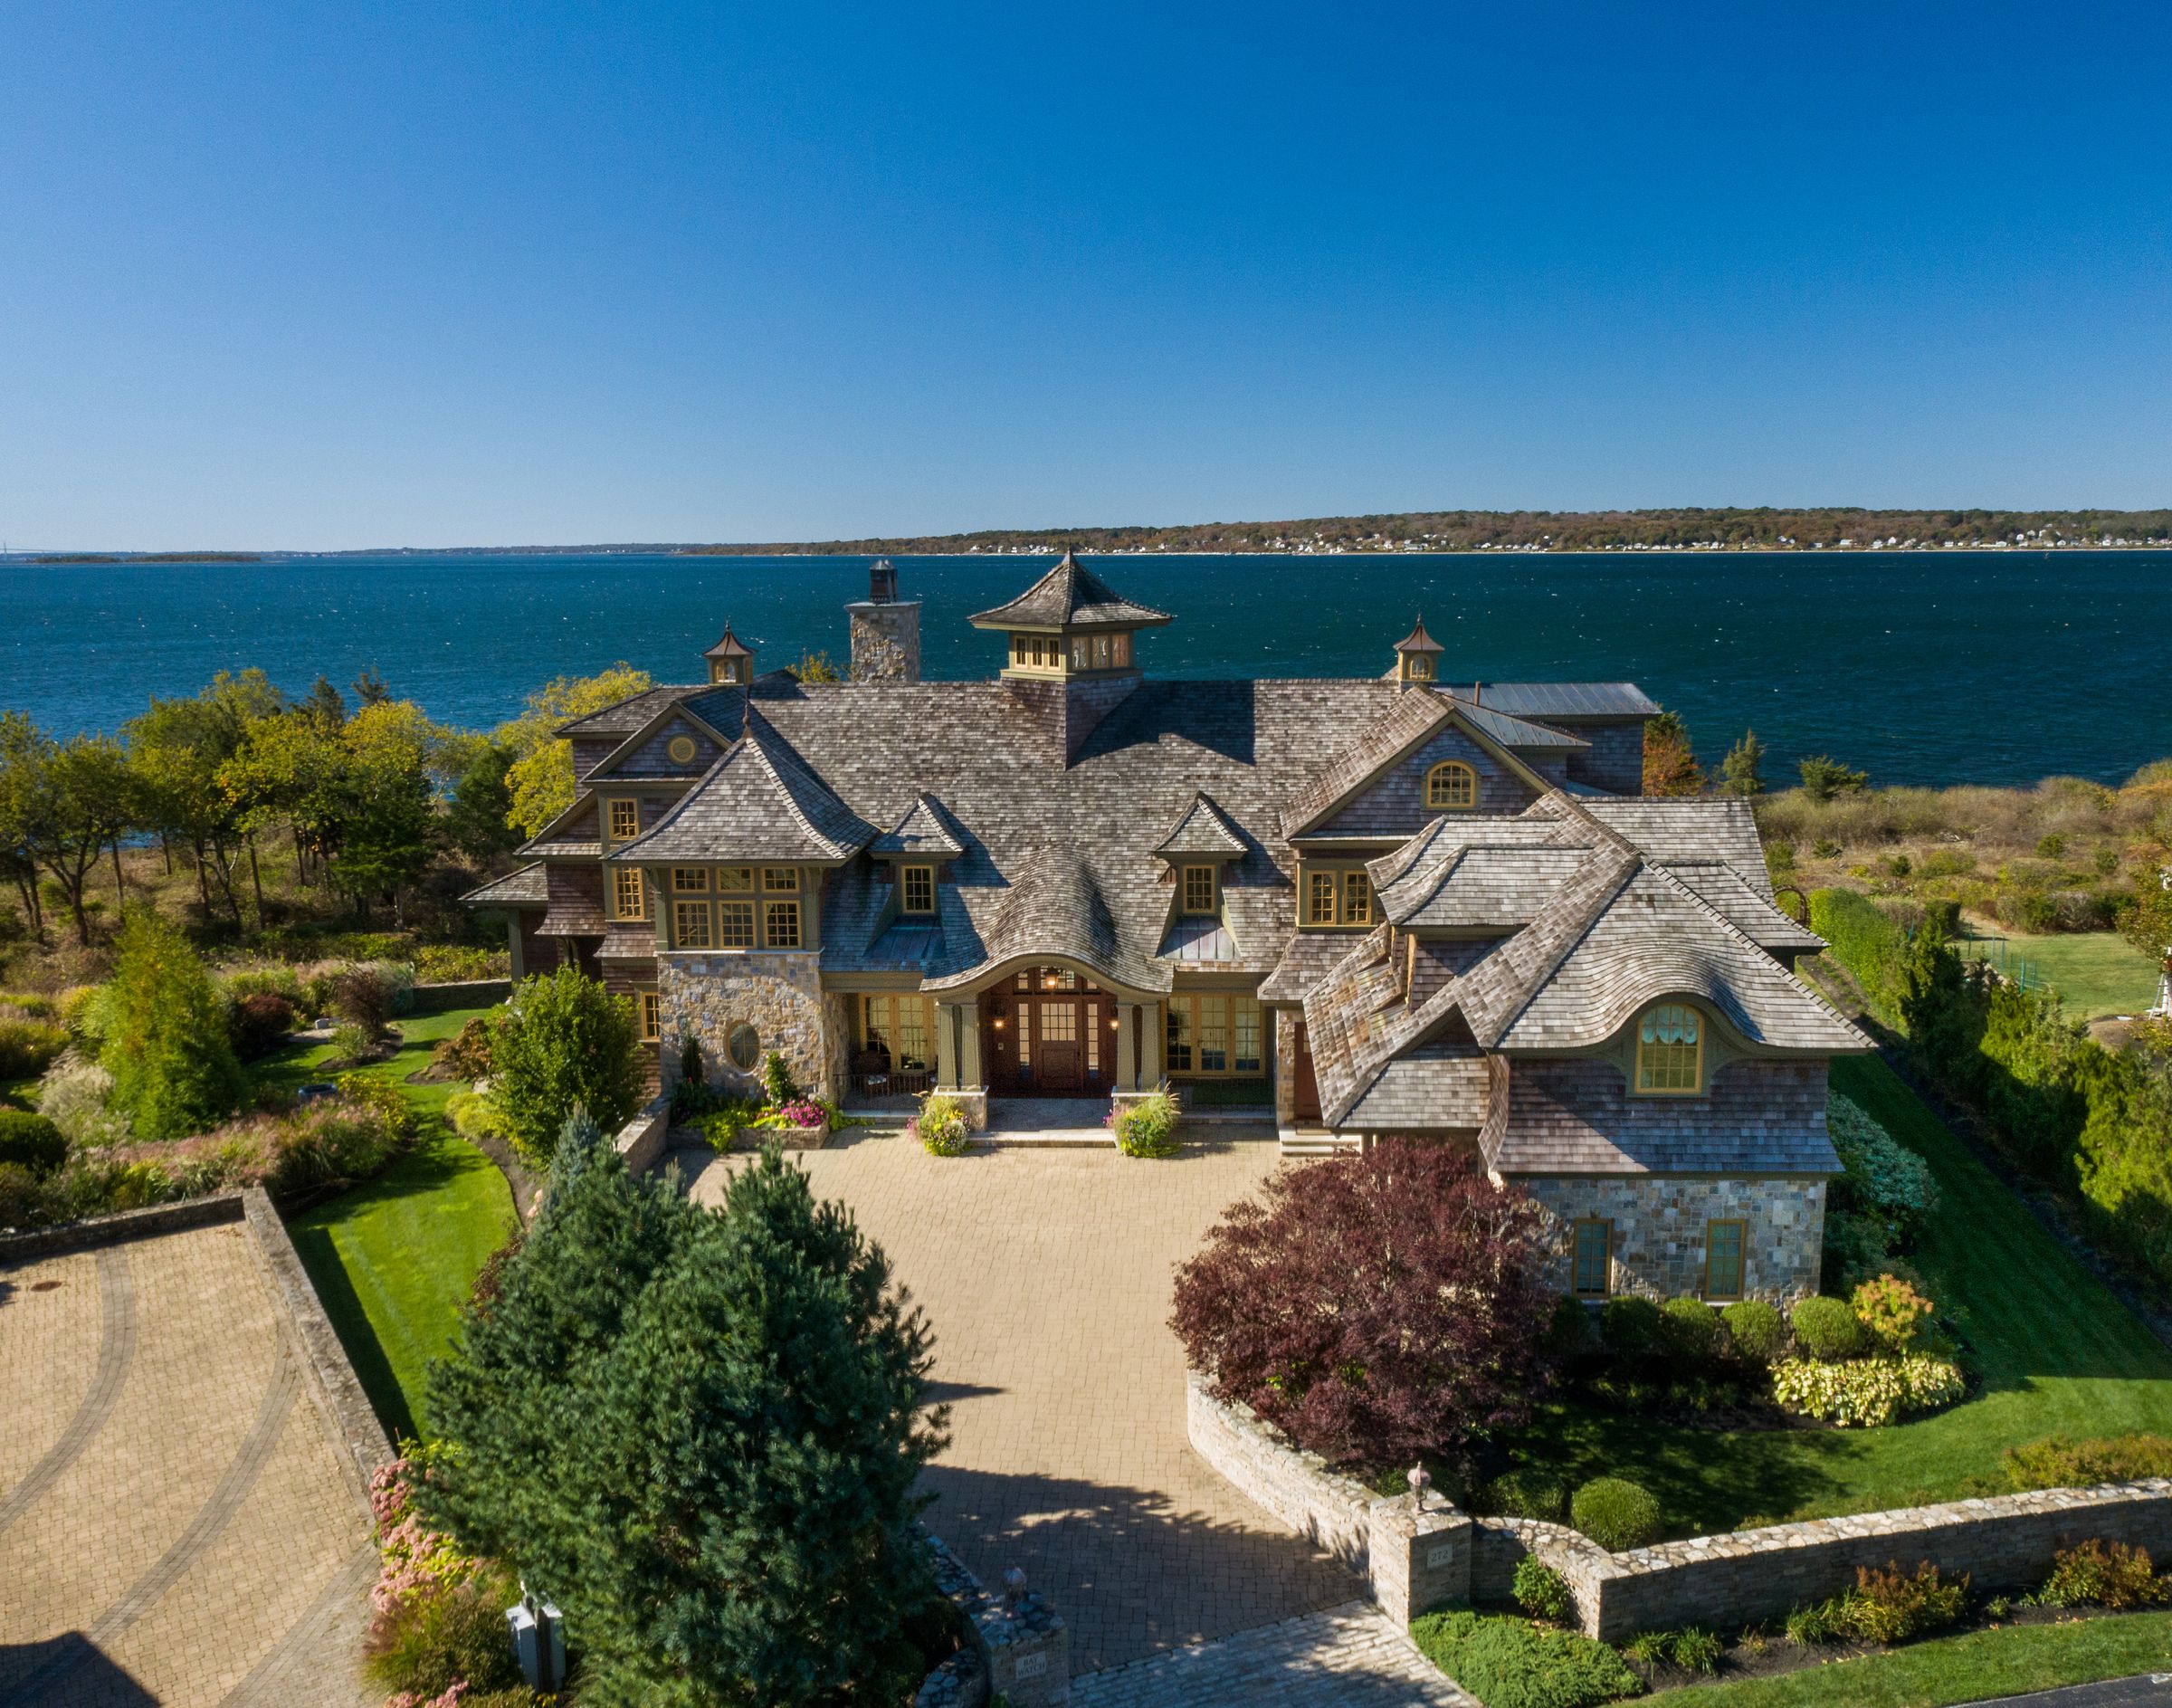 HOUSE OF THE WEEK: PRIVATE PORTSMOUTH WATERFRONT ESTATE OFFERED FOR $7.9 MILLION